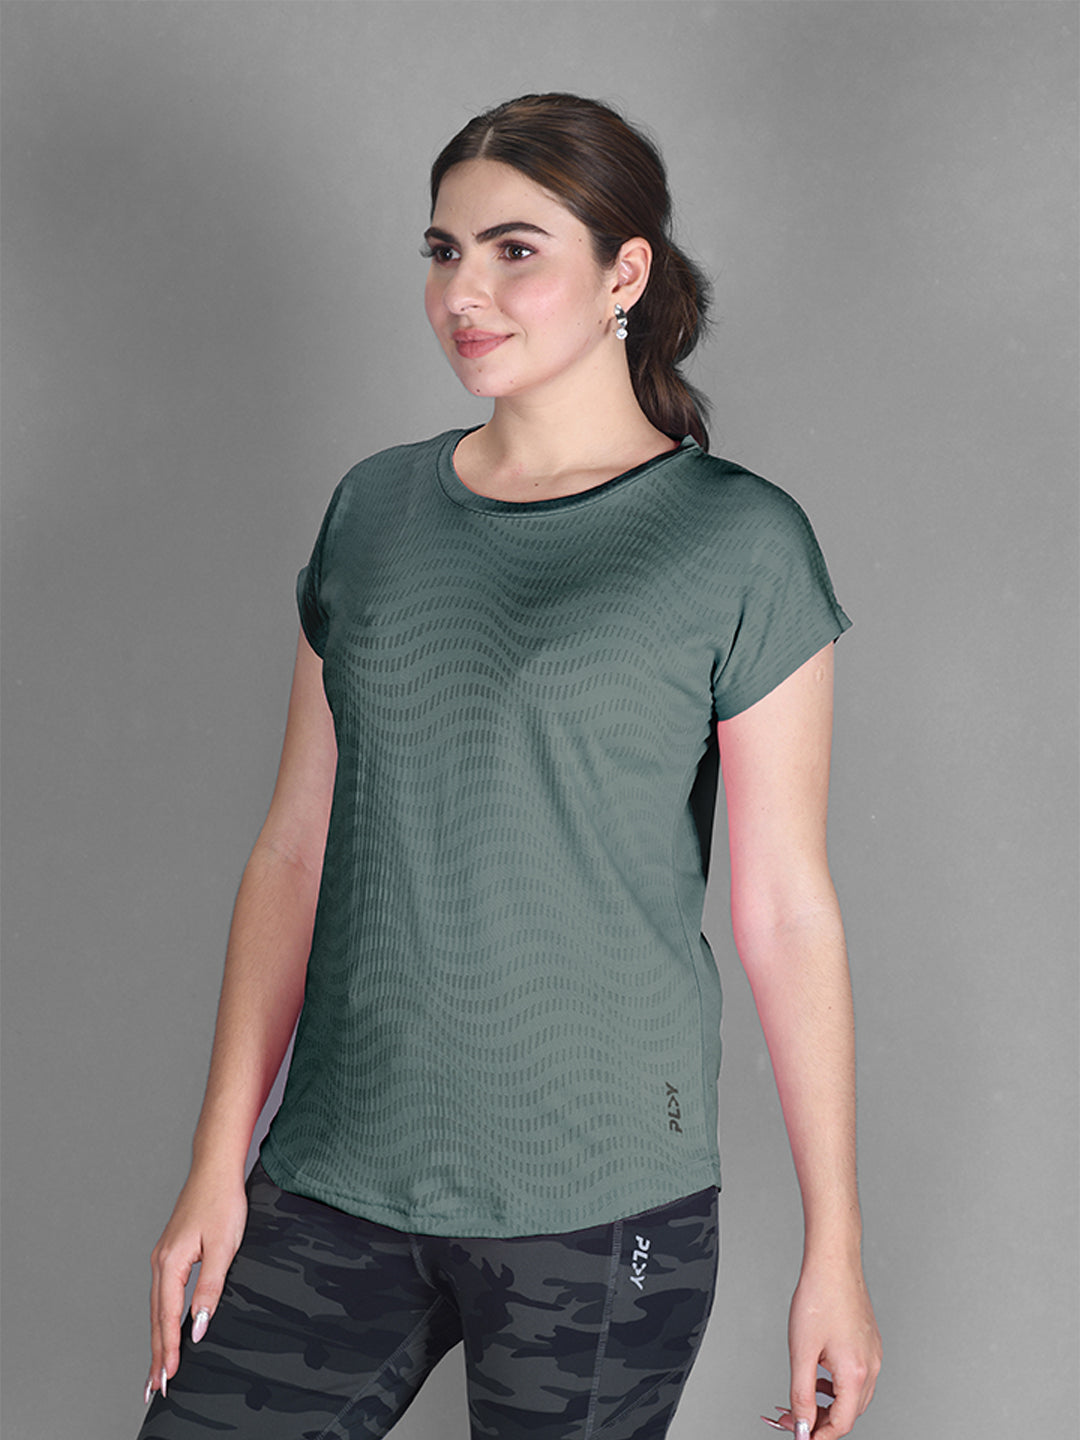 Grey Dri-Fit Play Series Active Wear Top